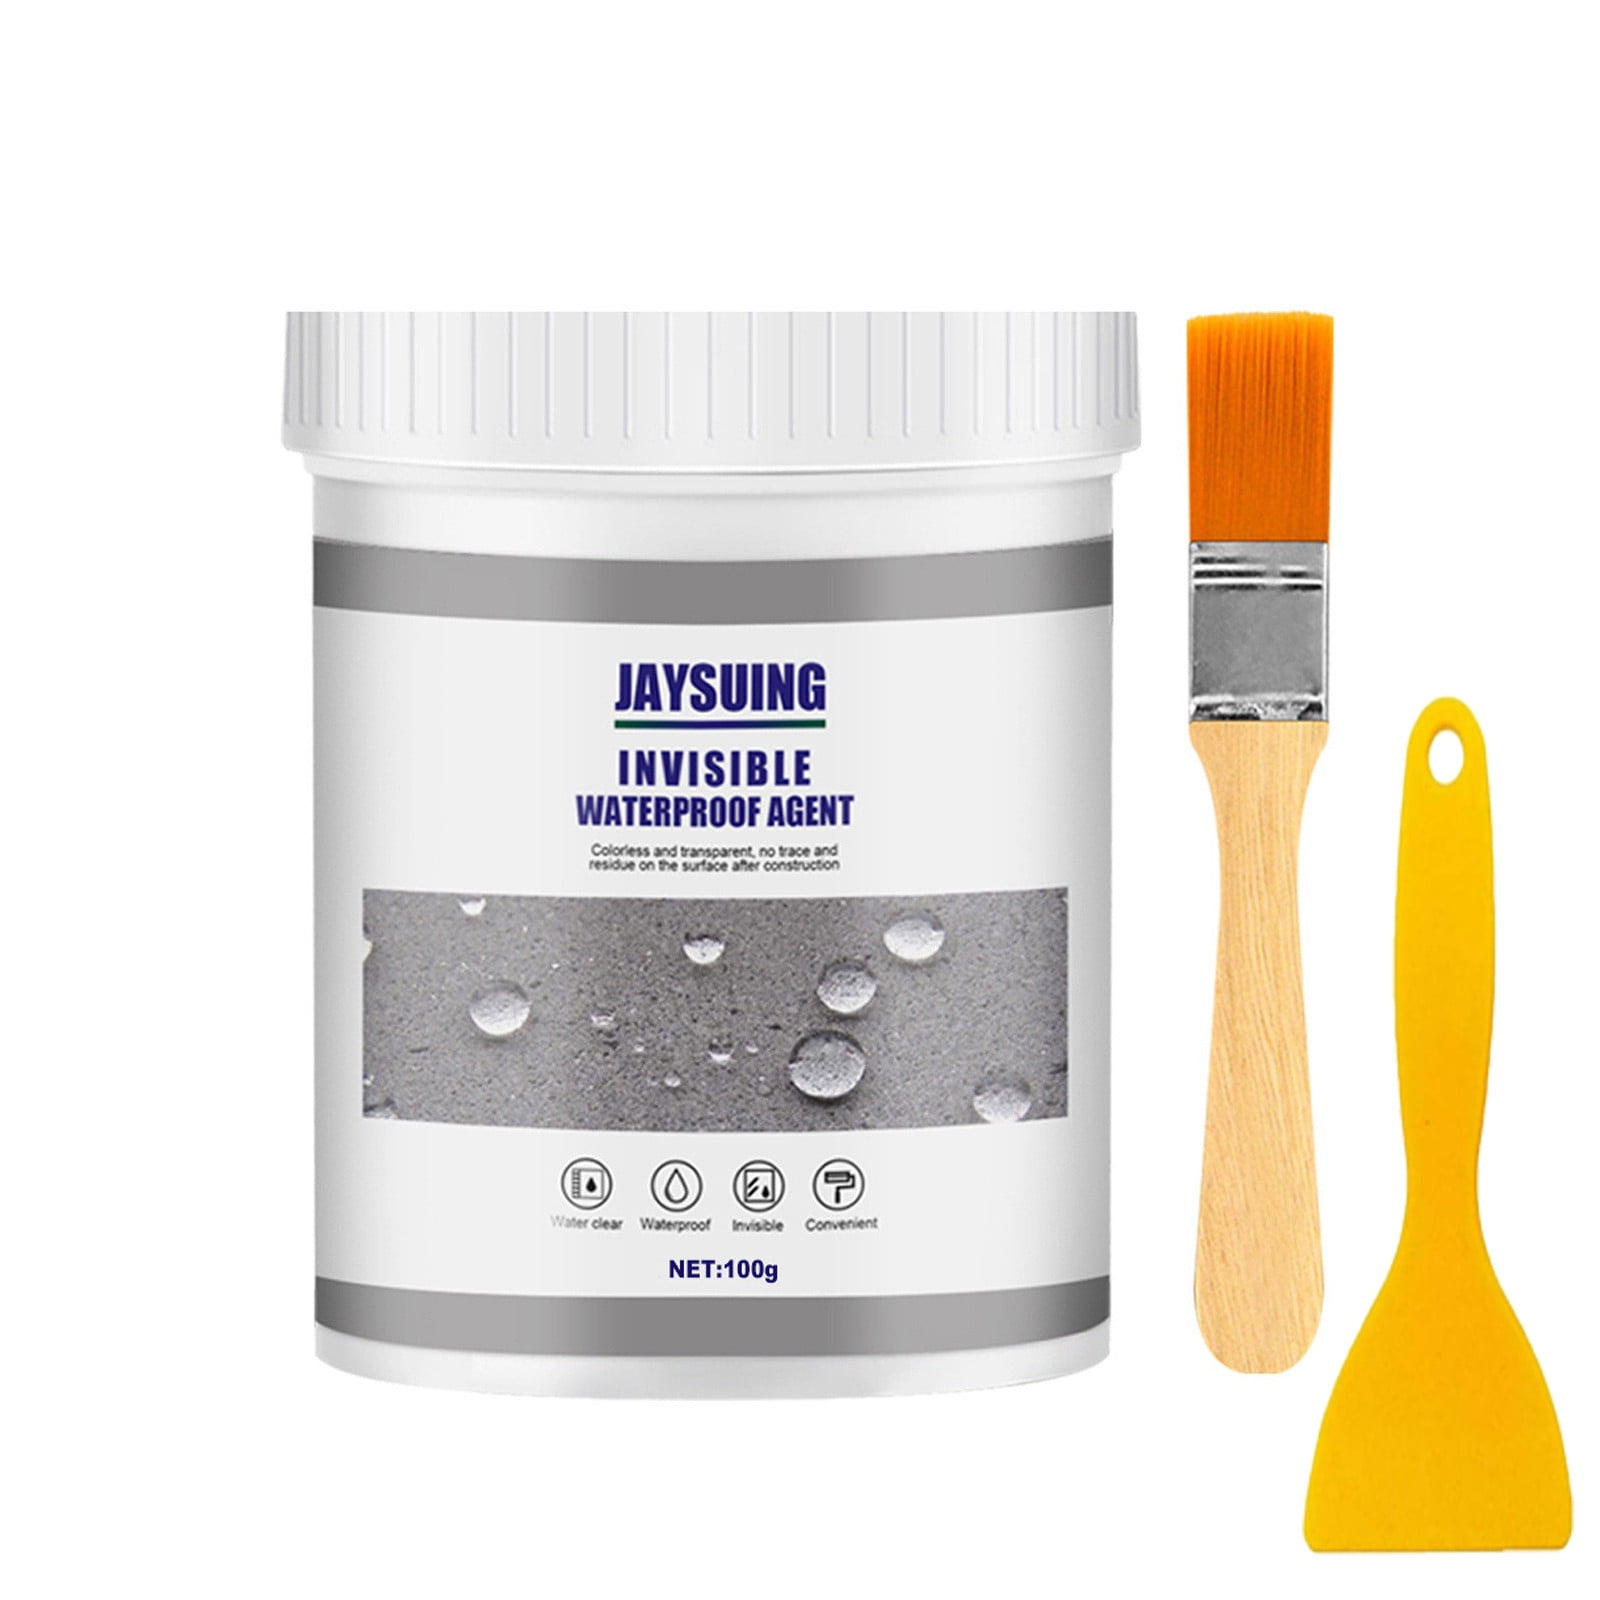 Jaysuing Invisible Waterproof Agent 10.5Fl Oz (300ml), Transparent  Waterproof Coating Waterproof Glue - Waterproof Sealant, Super Strong  Invisible Waterproof Anti-Leakage Agent 